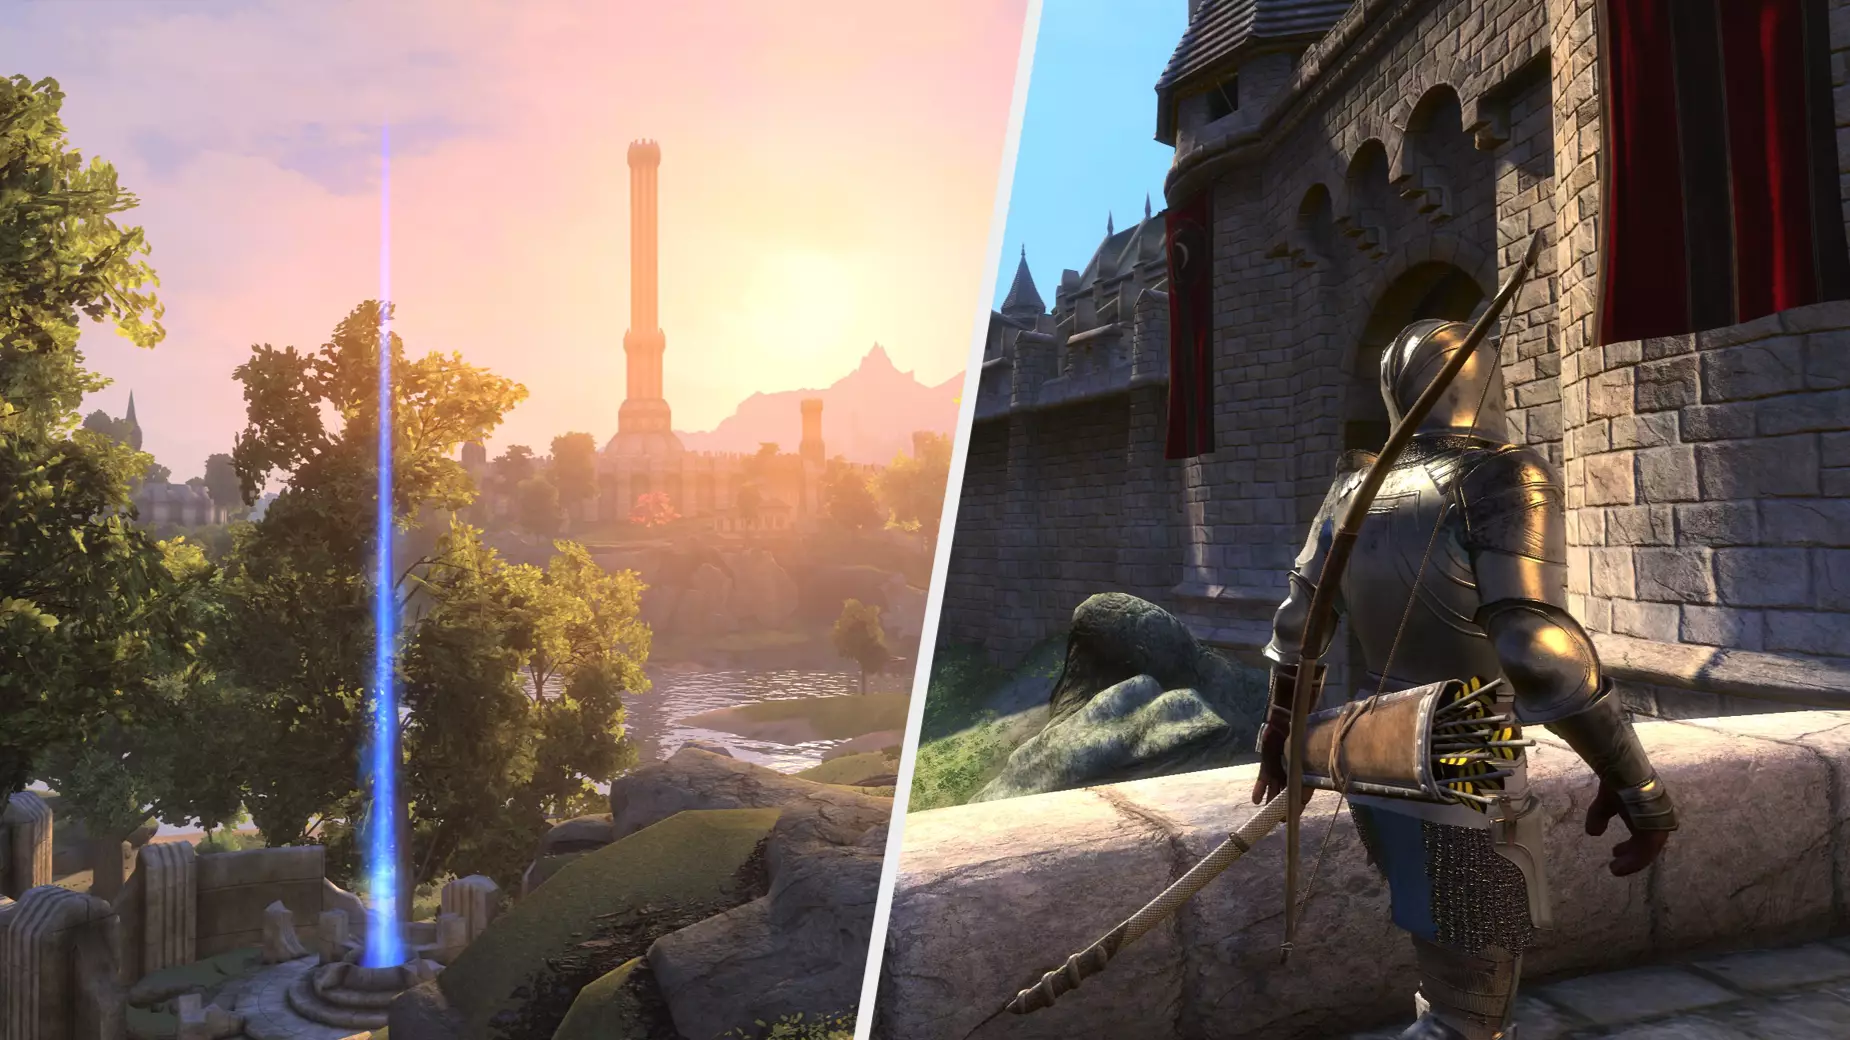 'Oblivion' Has Been Fully Remade In 'Skyrim' Thanks To This Epic Mod